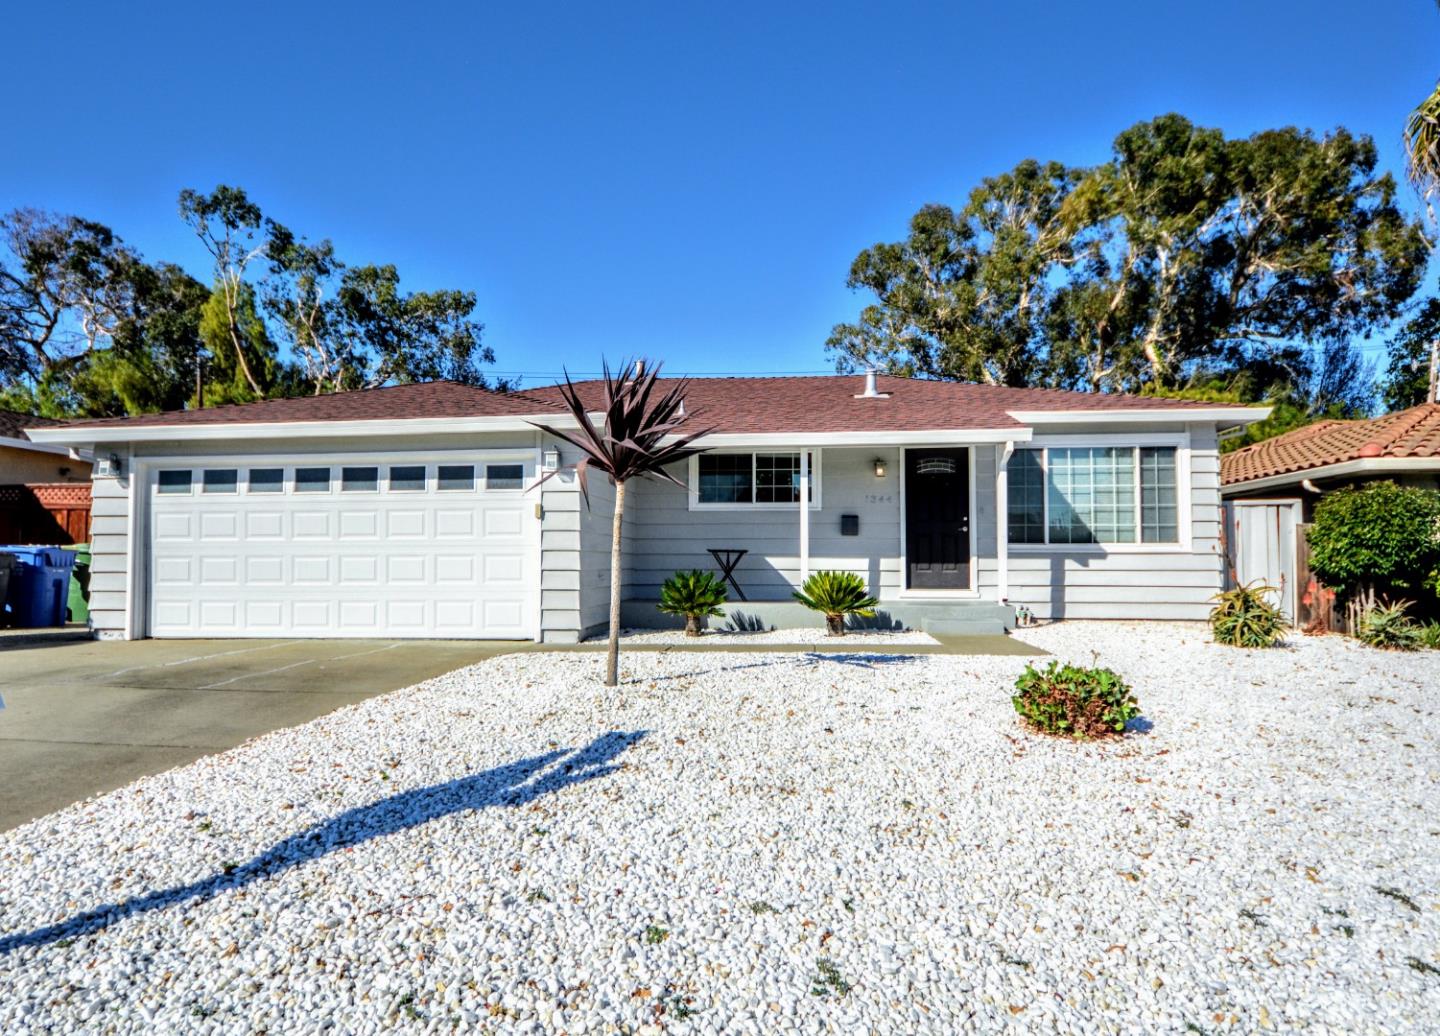 1344 N Hillview Dr Milpitas CA 95035 3 Beds 2 Baths (Sold